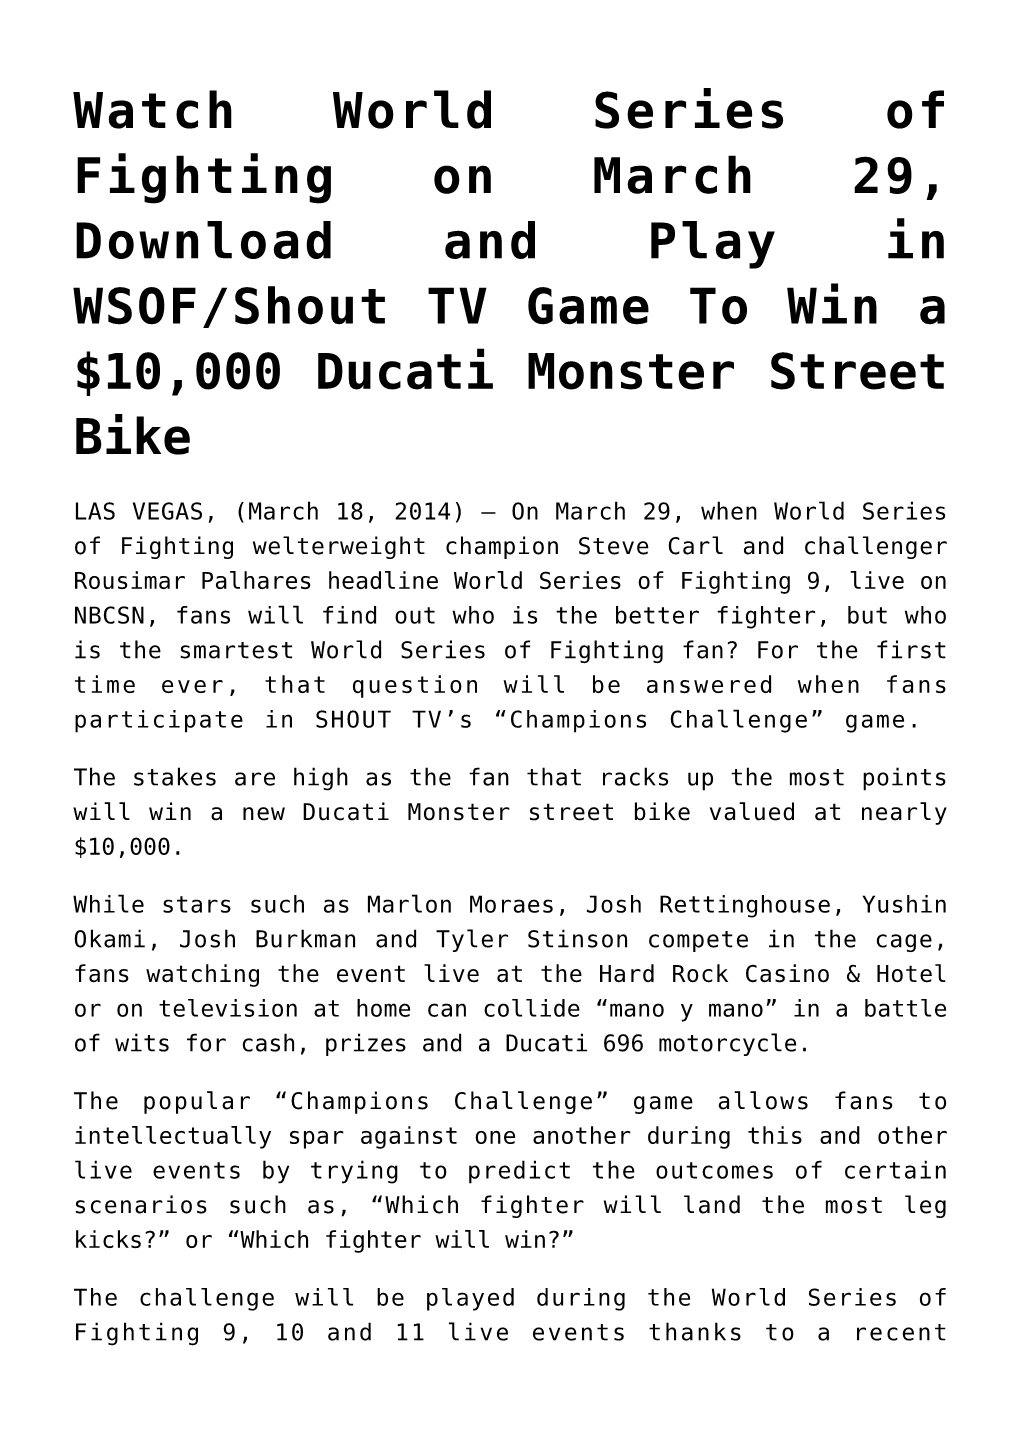 Watch World Series of Fighting on March 29, Download and Play in WSOF/Shout TV Game to Win a $10,000 Ducati Monster Street Bike